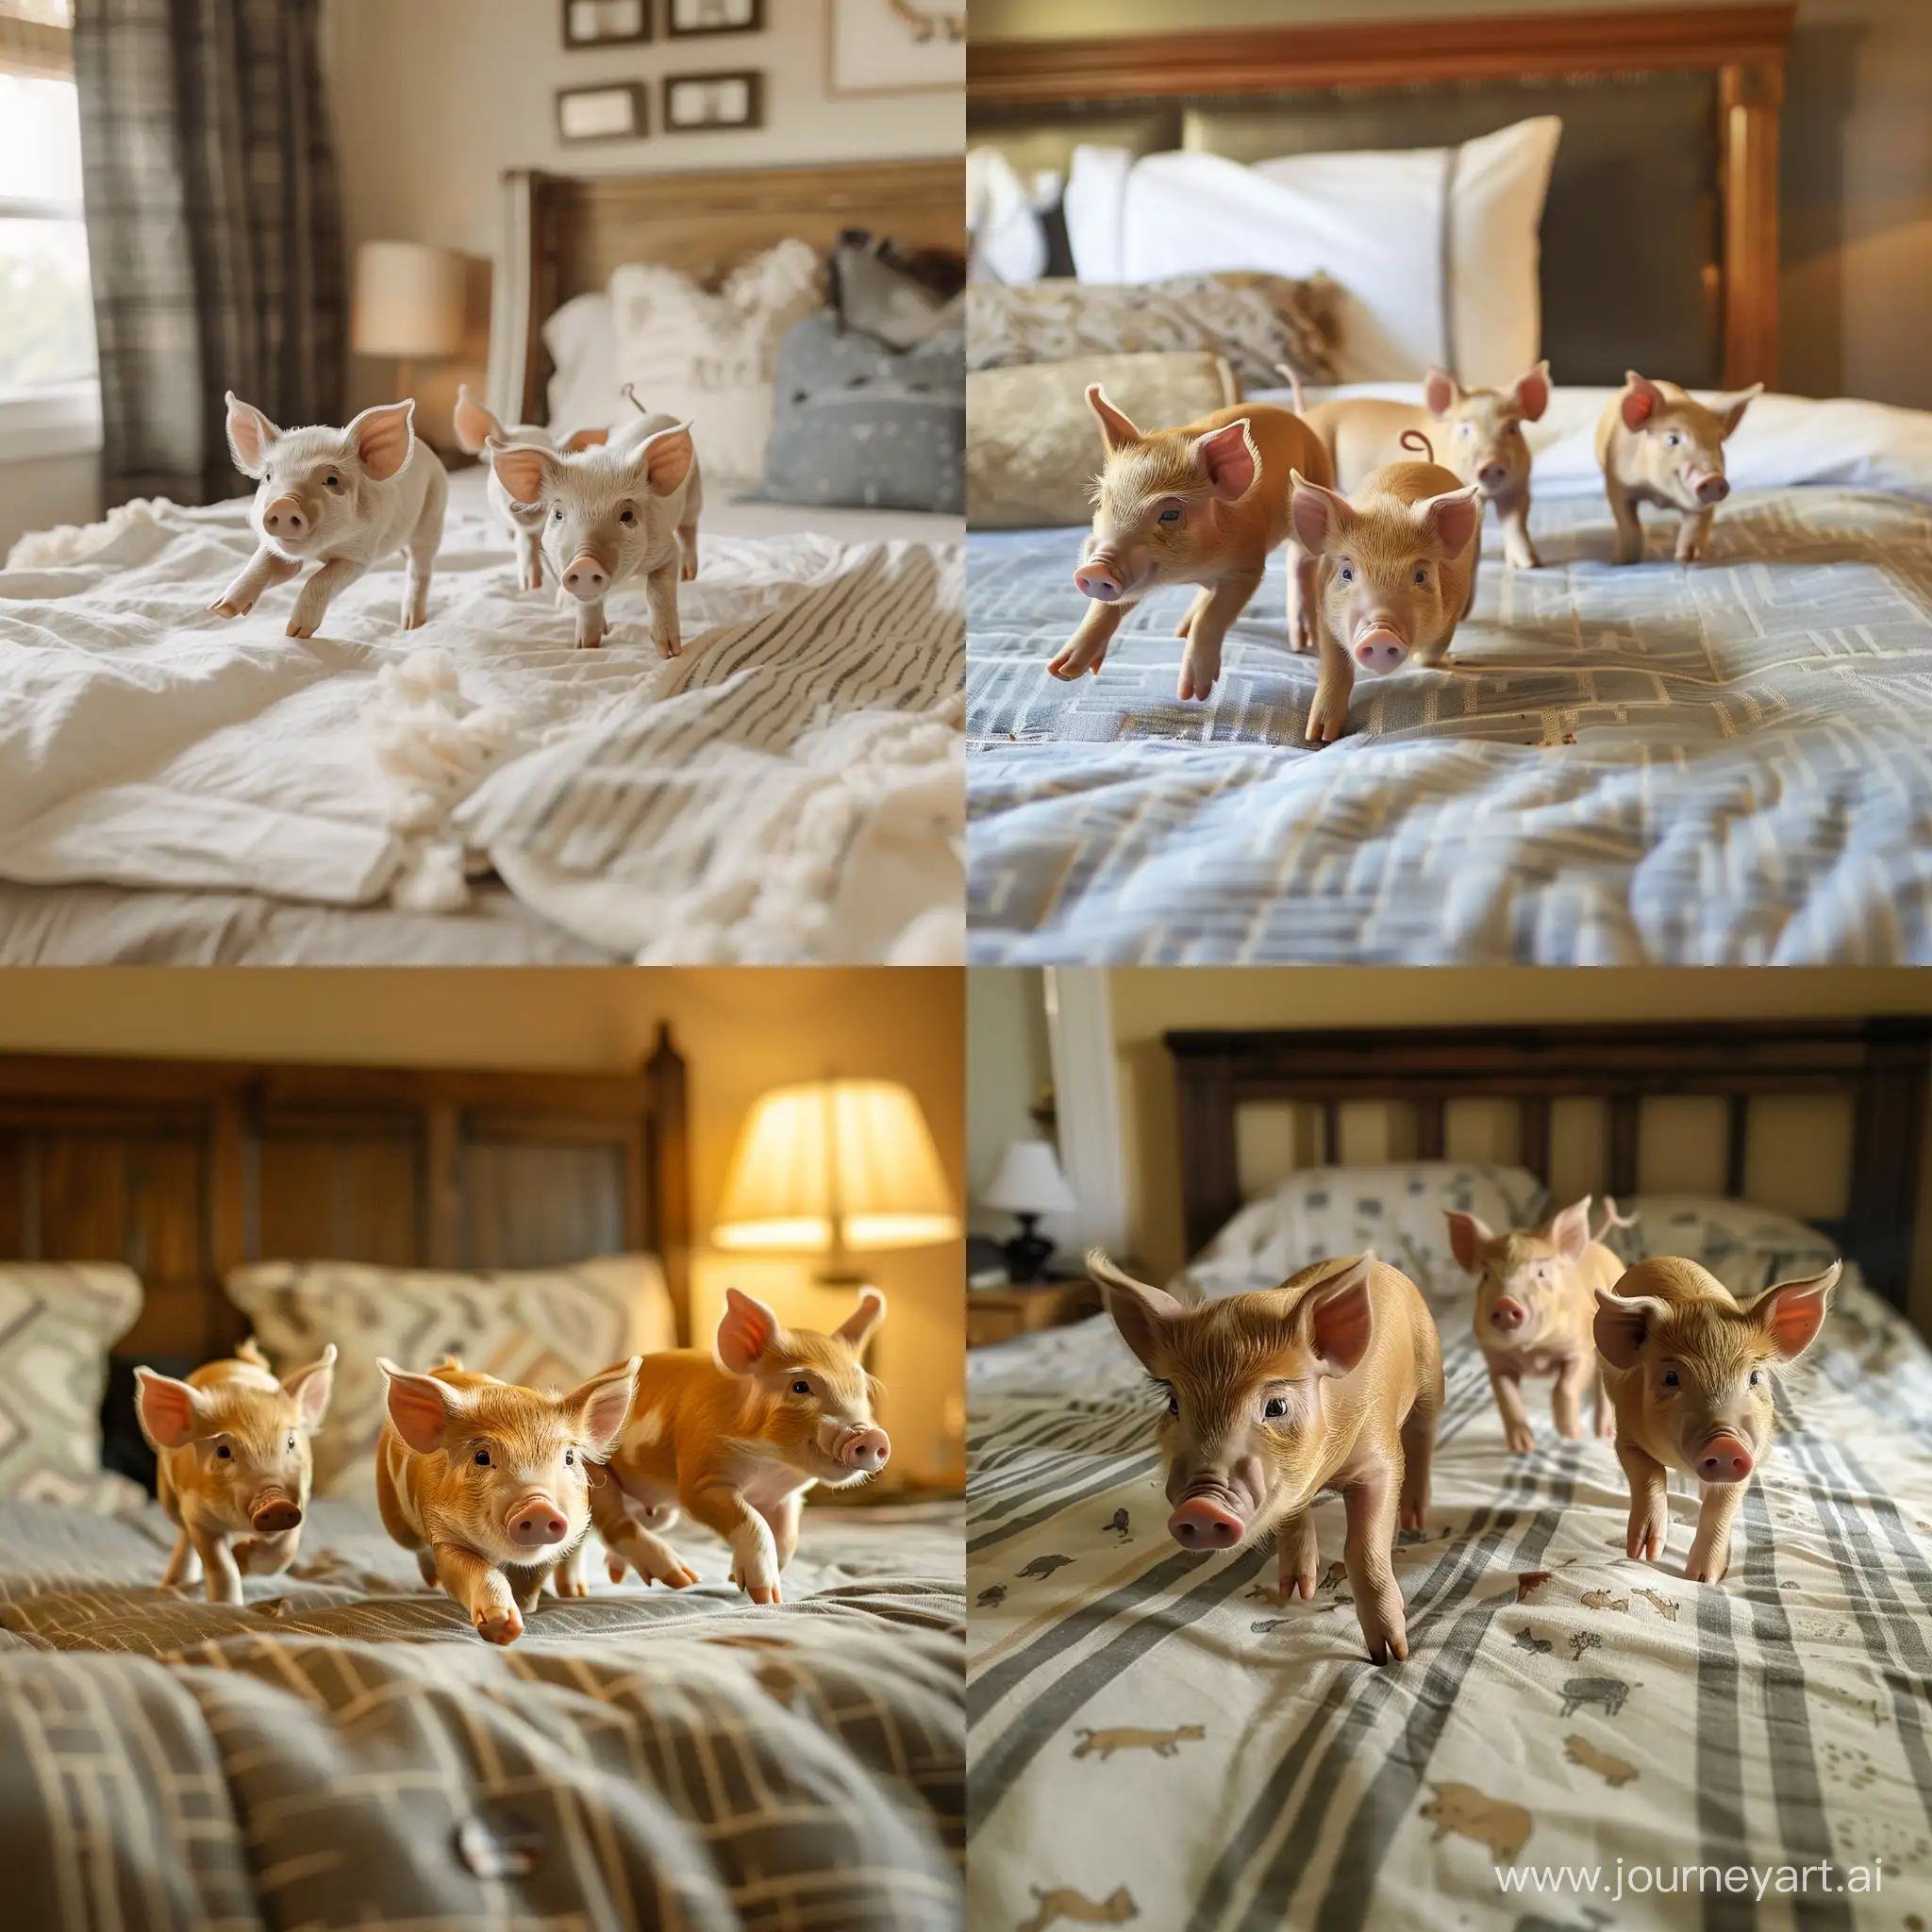 Playful-Forest-Piglets-Frolicking-on-the-Bed